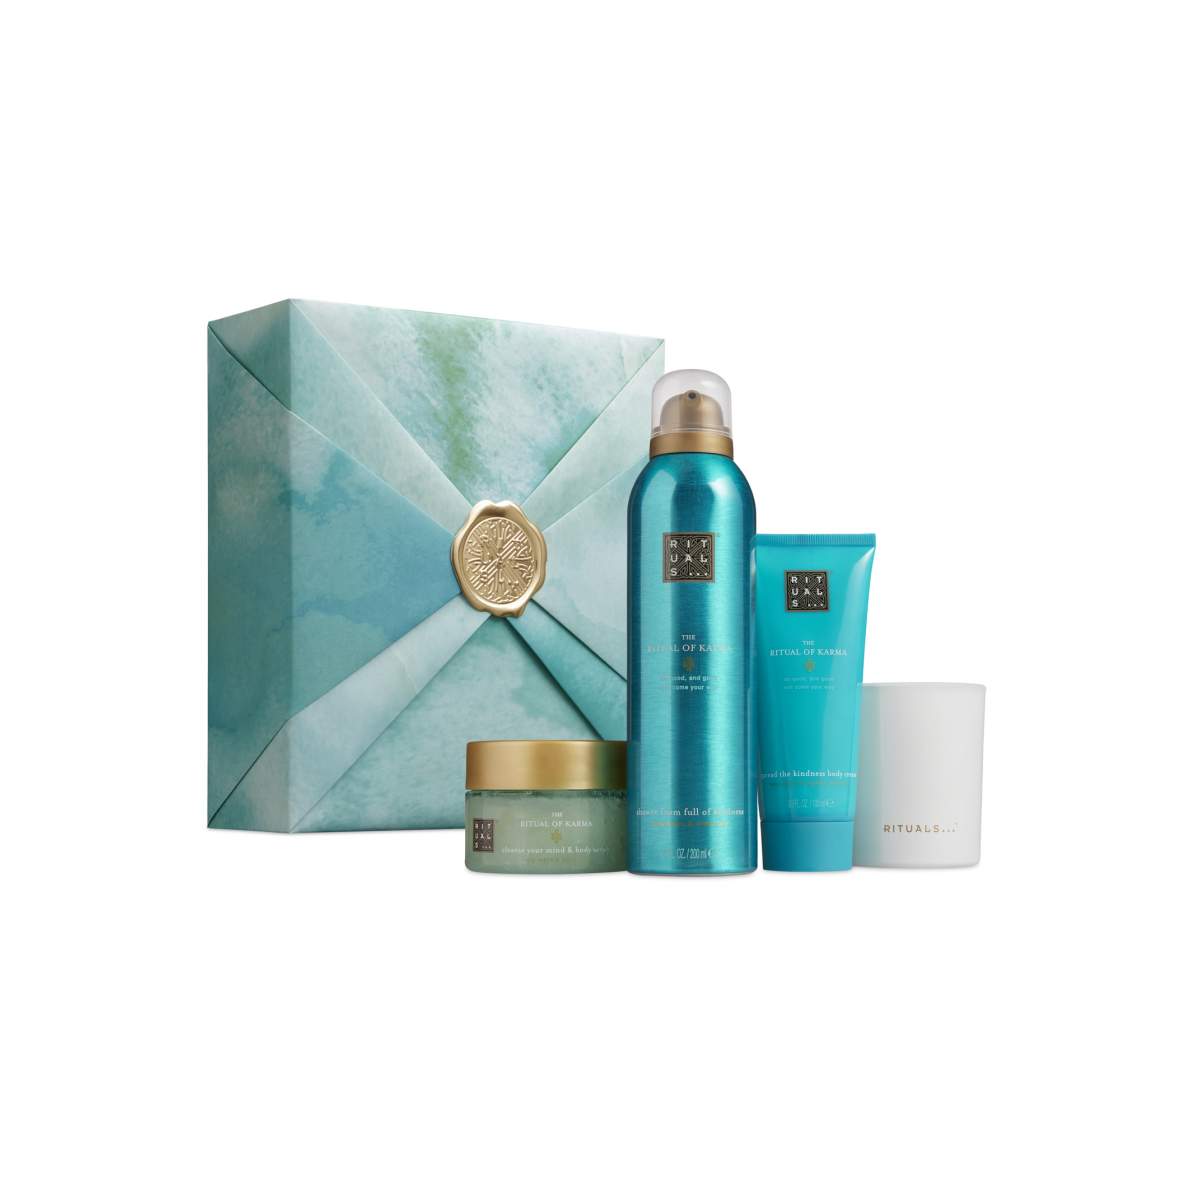 Rituals® The Ritual of Karma - Medium Gift Set - FDS Promotions